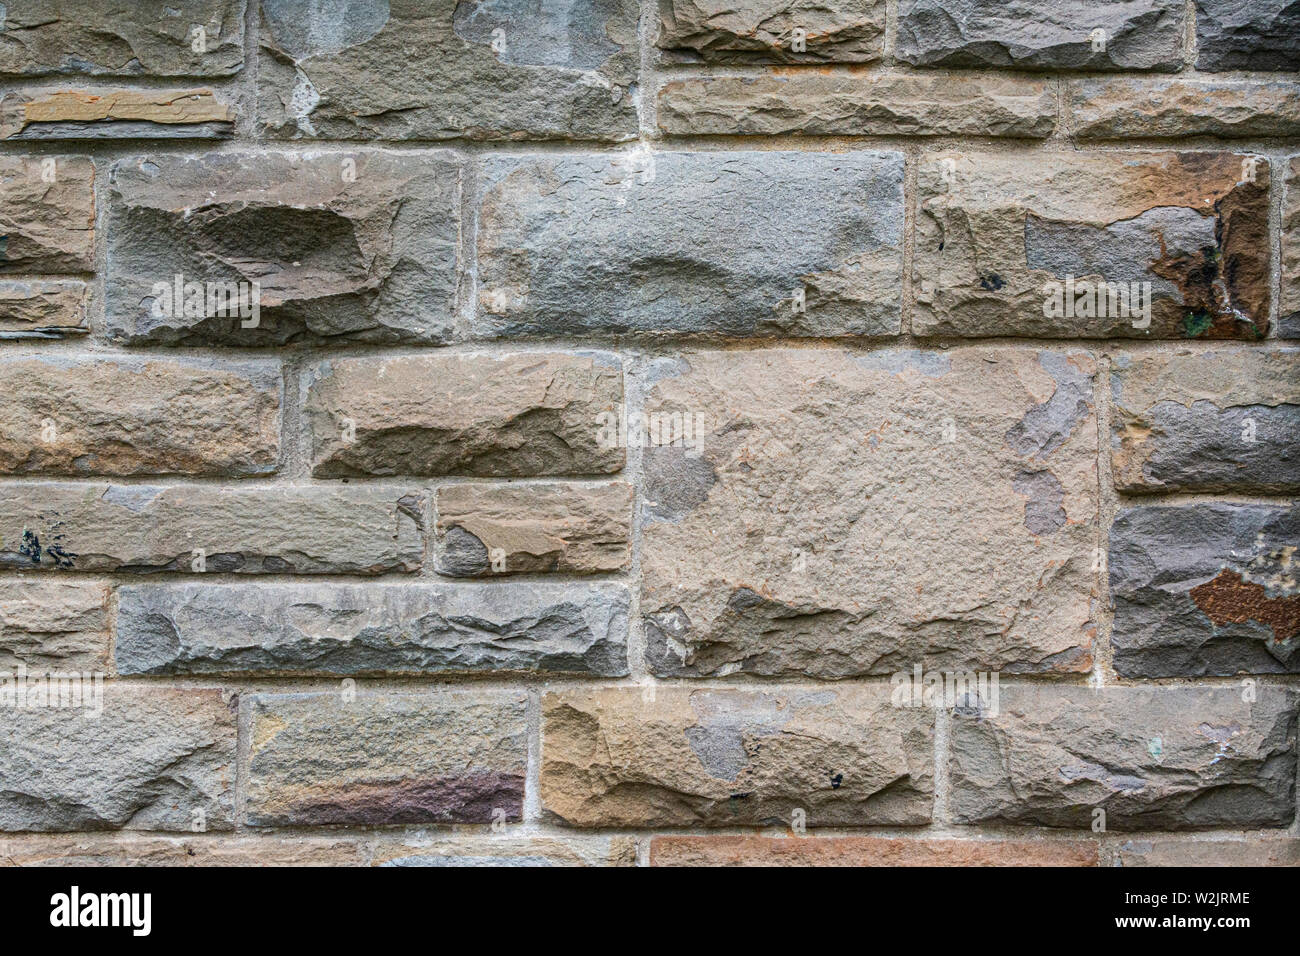 A wall built with stone blocks Stock Photo